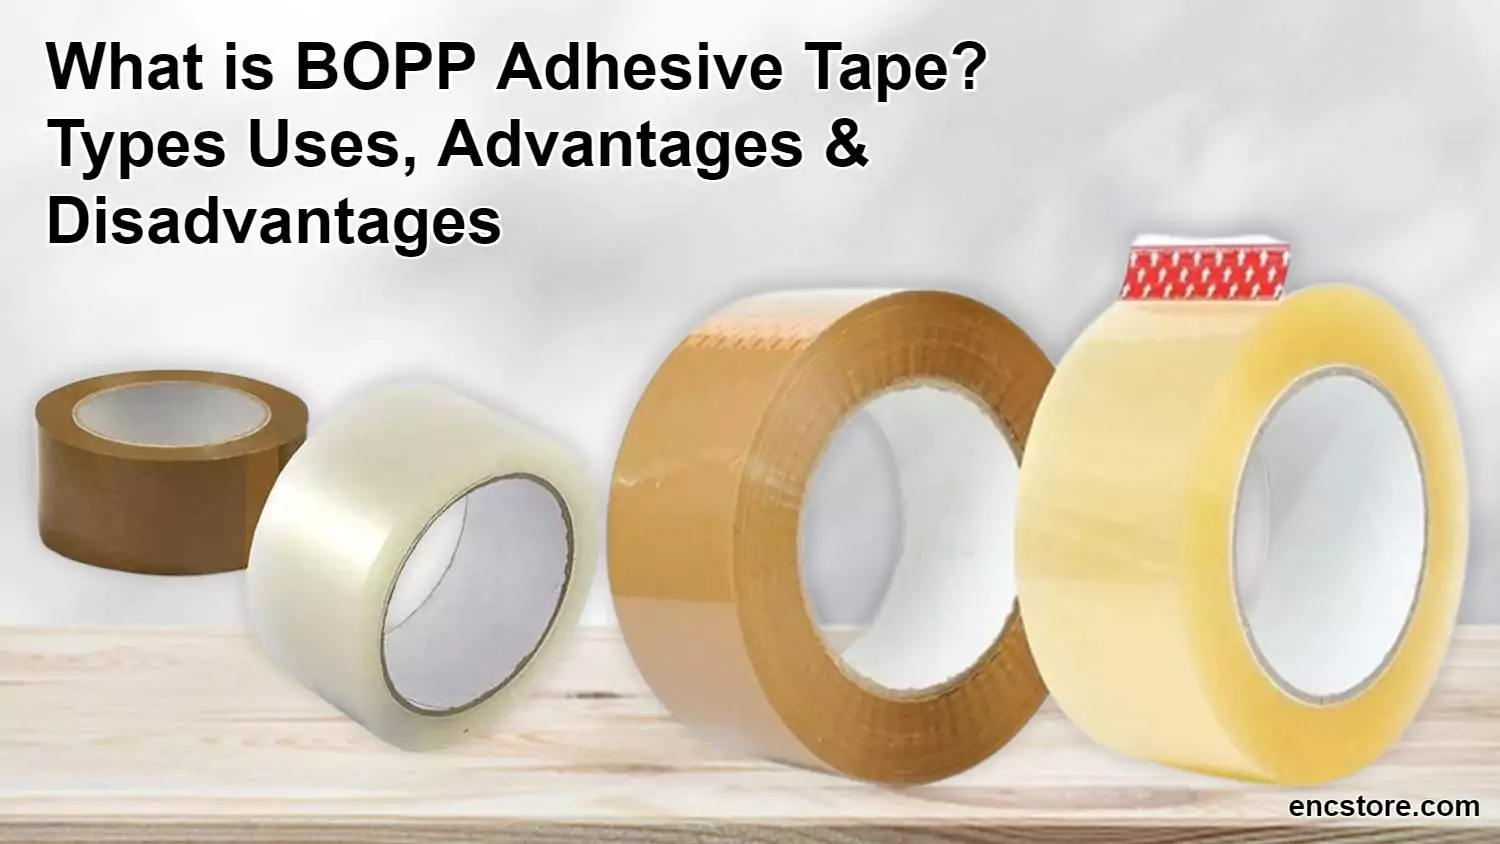 What is BOPP Adhesive Tape